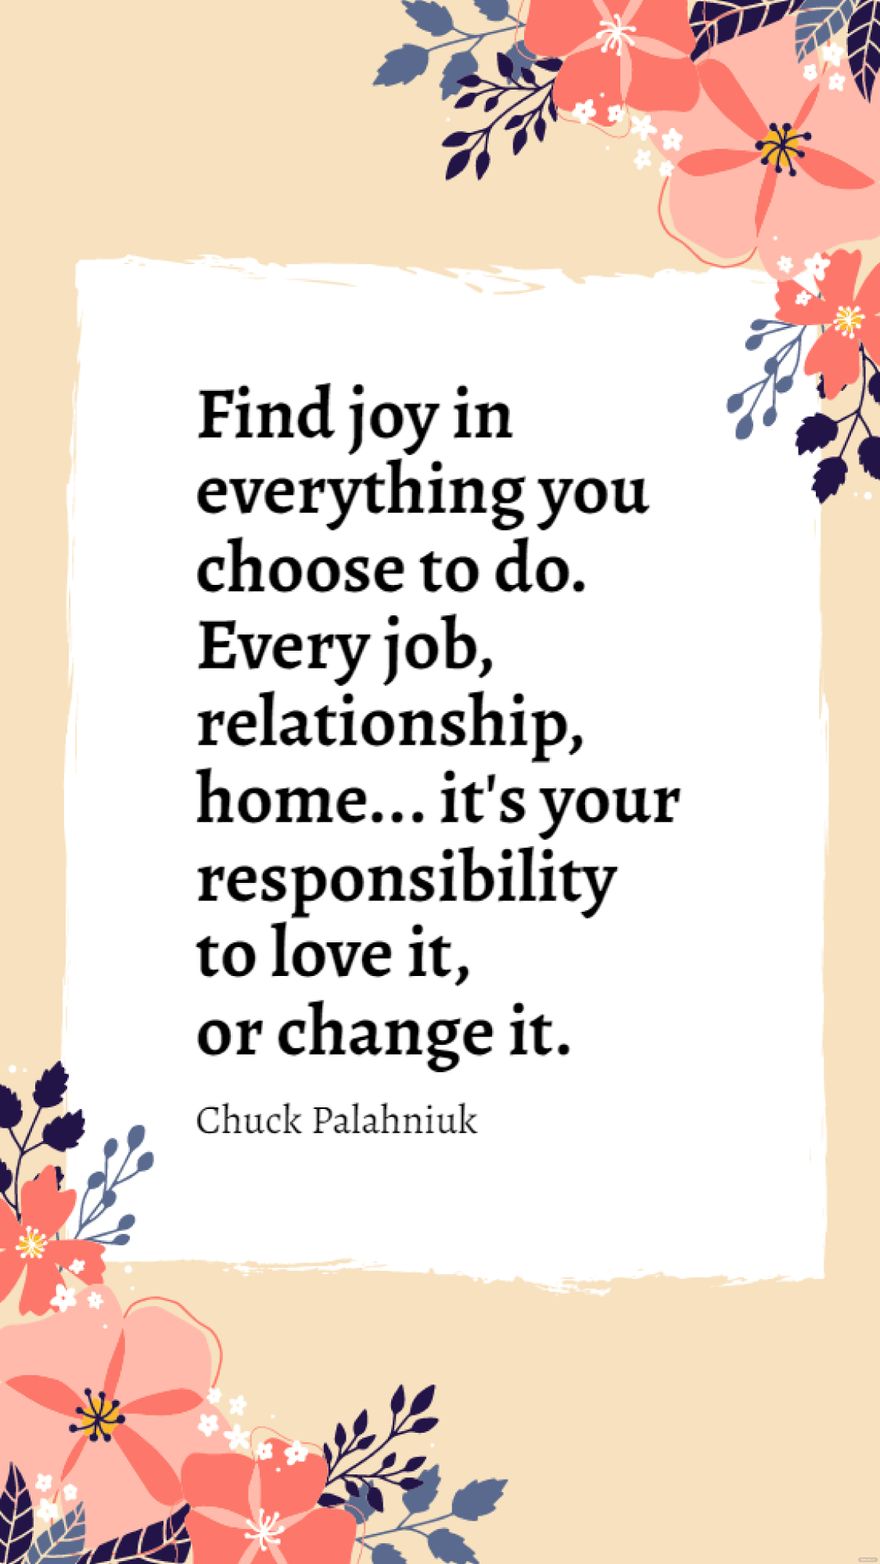 Chuck Palahniuk - Find joy in everything you choose to do. Every job, relationship, home... it's your responsibility to love it, or change it.